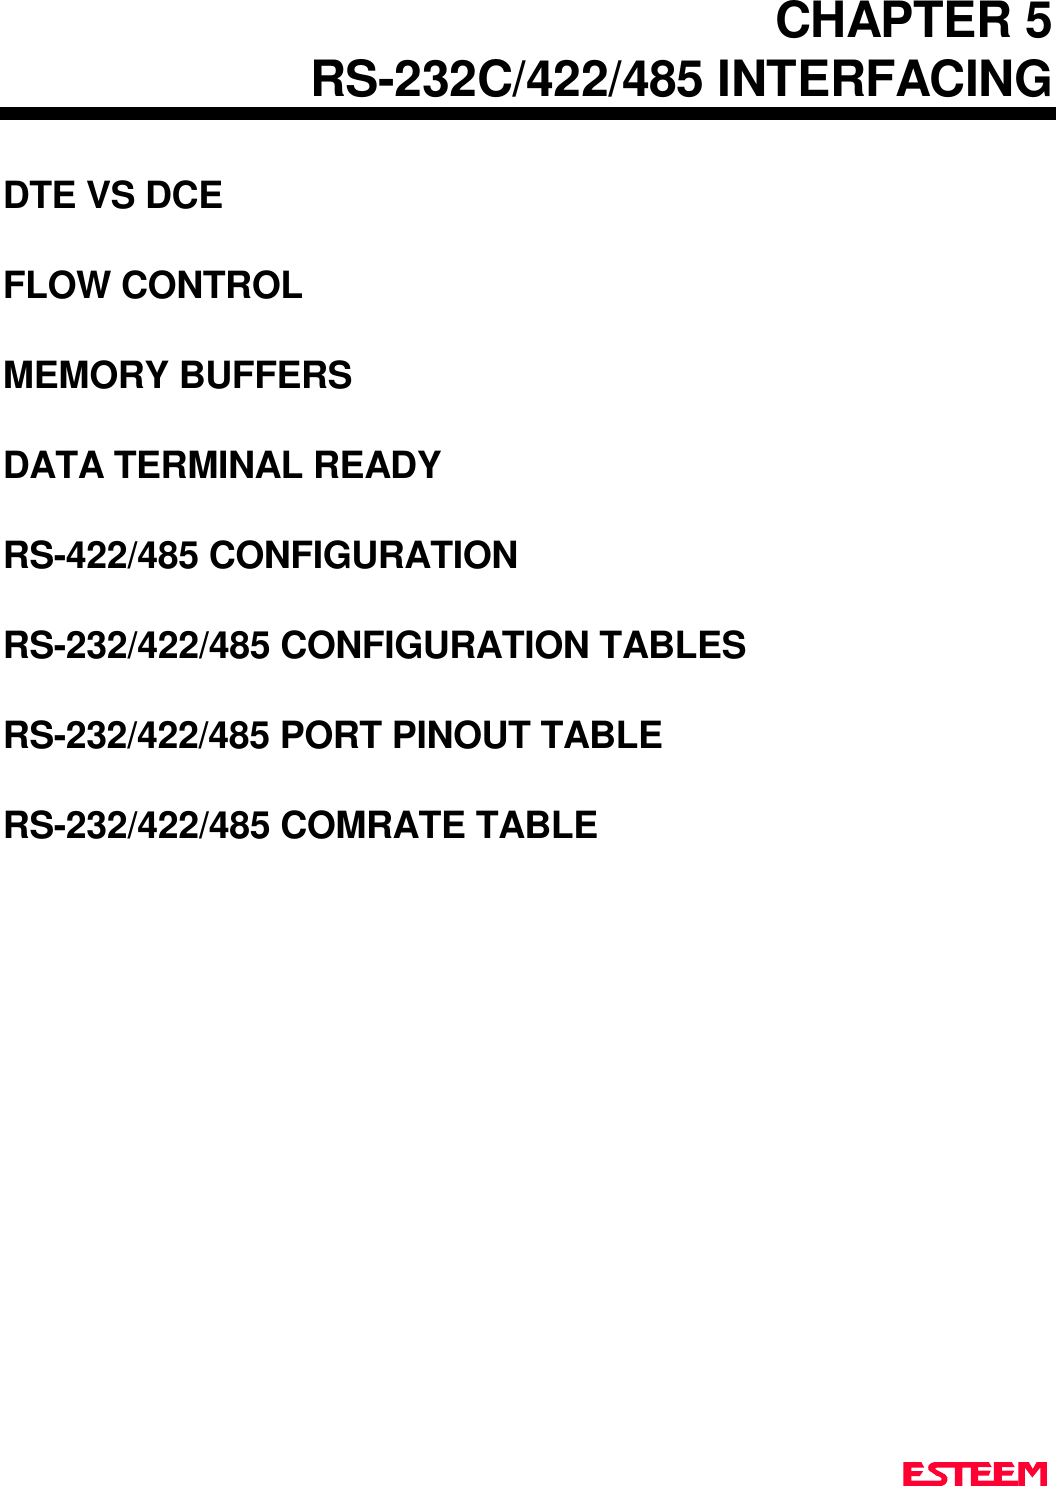 CHAPTER 5RS-232C/422/485 INTERFACINGDTE VS DCEFLOW CONTROLMEMORY BUFFERSDATA TERMINAL READYRS-422/485 CONFIGURATIONRS-232/422/485 CONFIGURATION TABLESRS-232/422/485 PORT PINOUT TABLERS-232/422/485 COMRATE TABLE